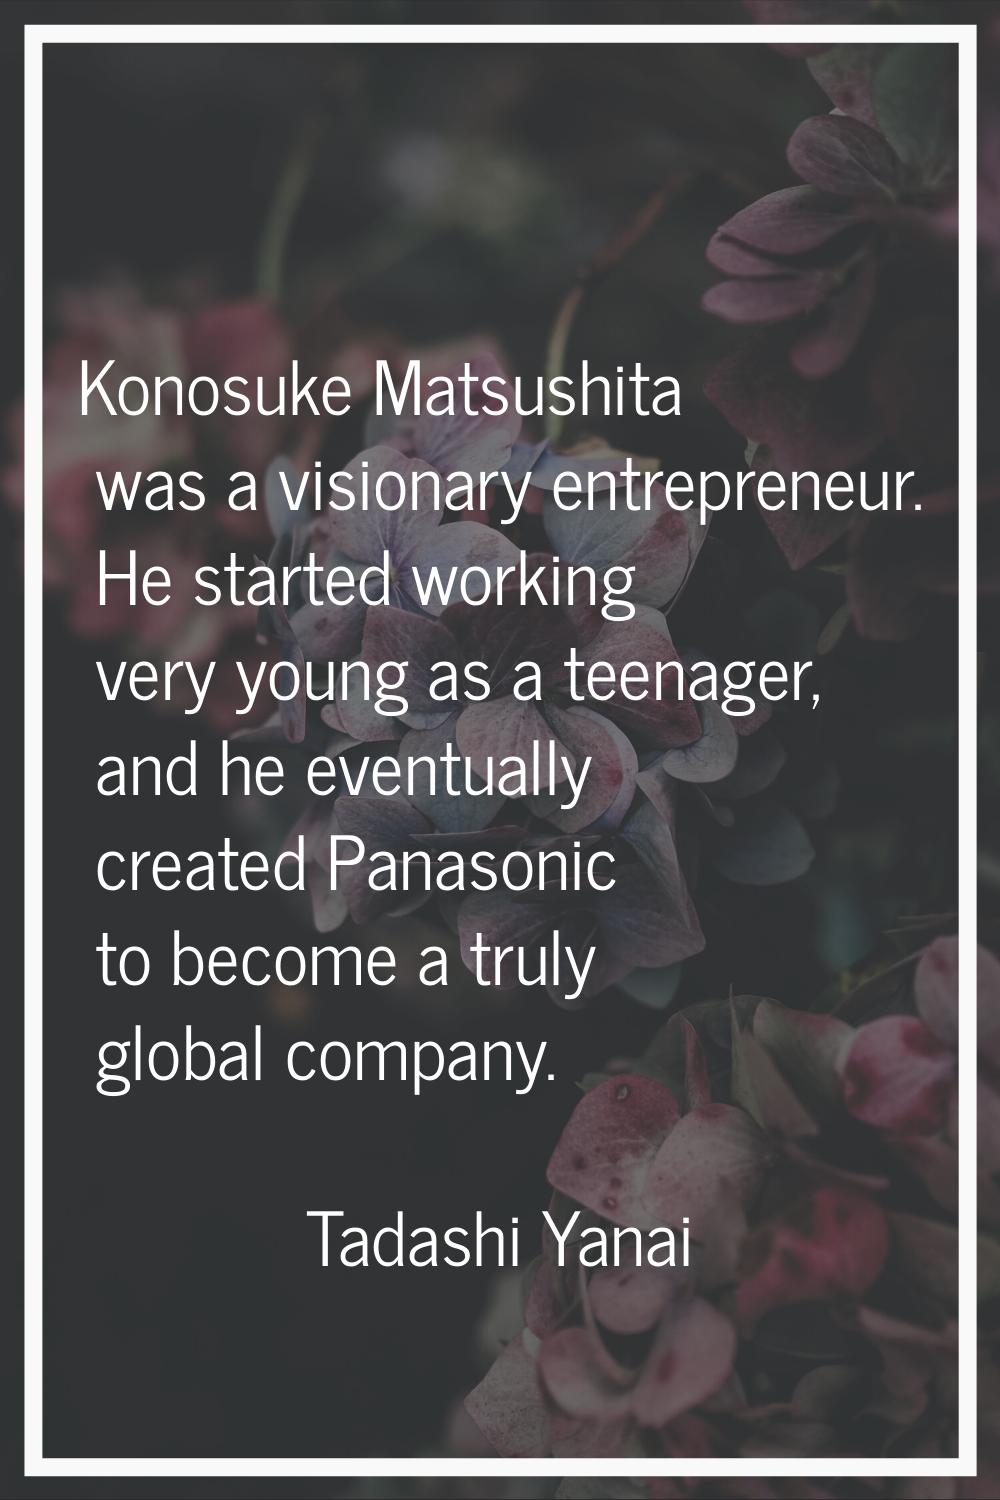 Konosuke Matsushita was a visionary entrepreneur. He started working very young as a teenager, and 